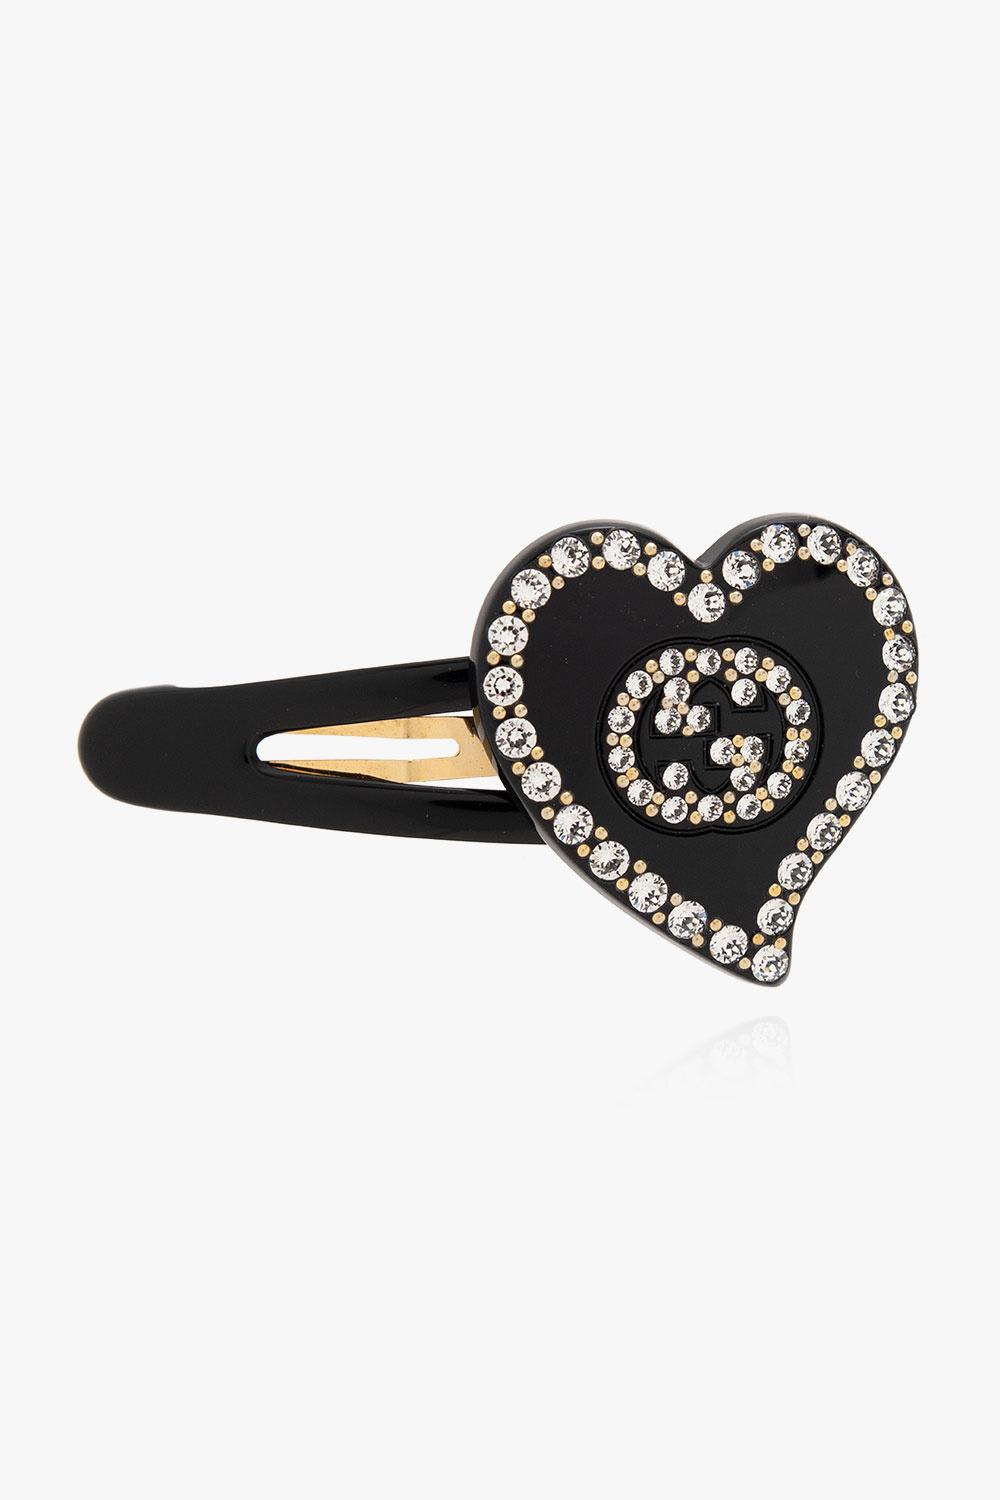 GUCCI BRANDED HAIR CLIP